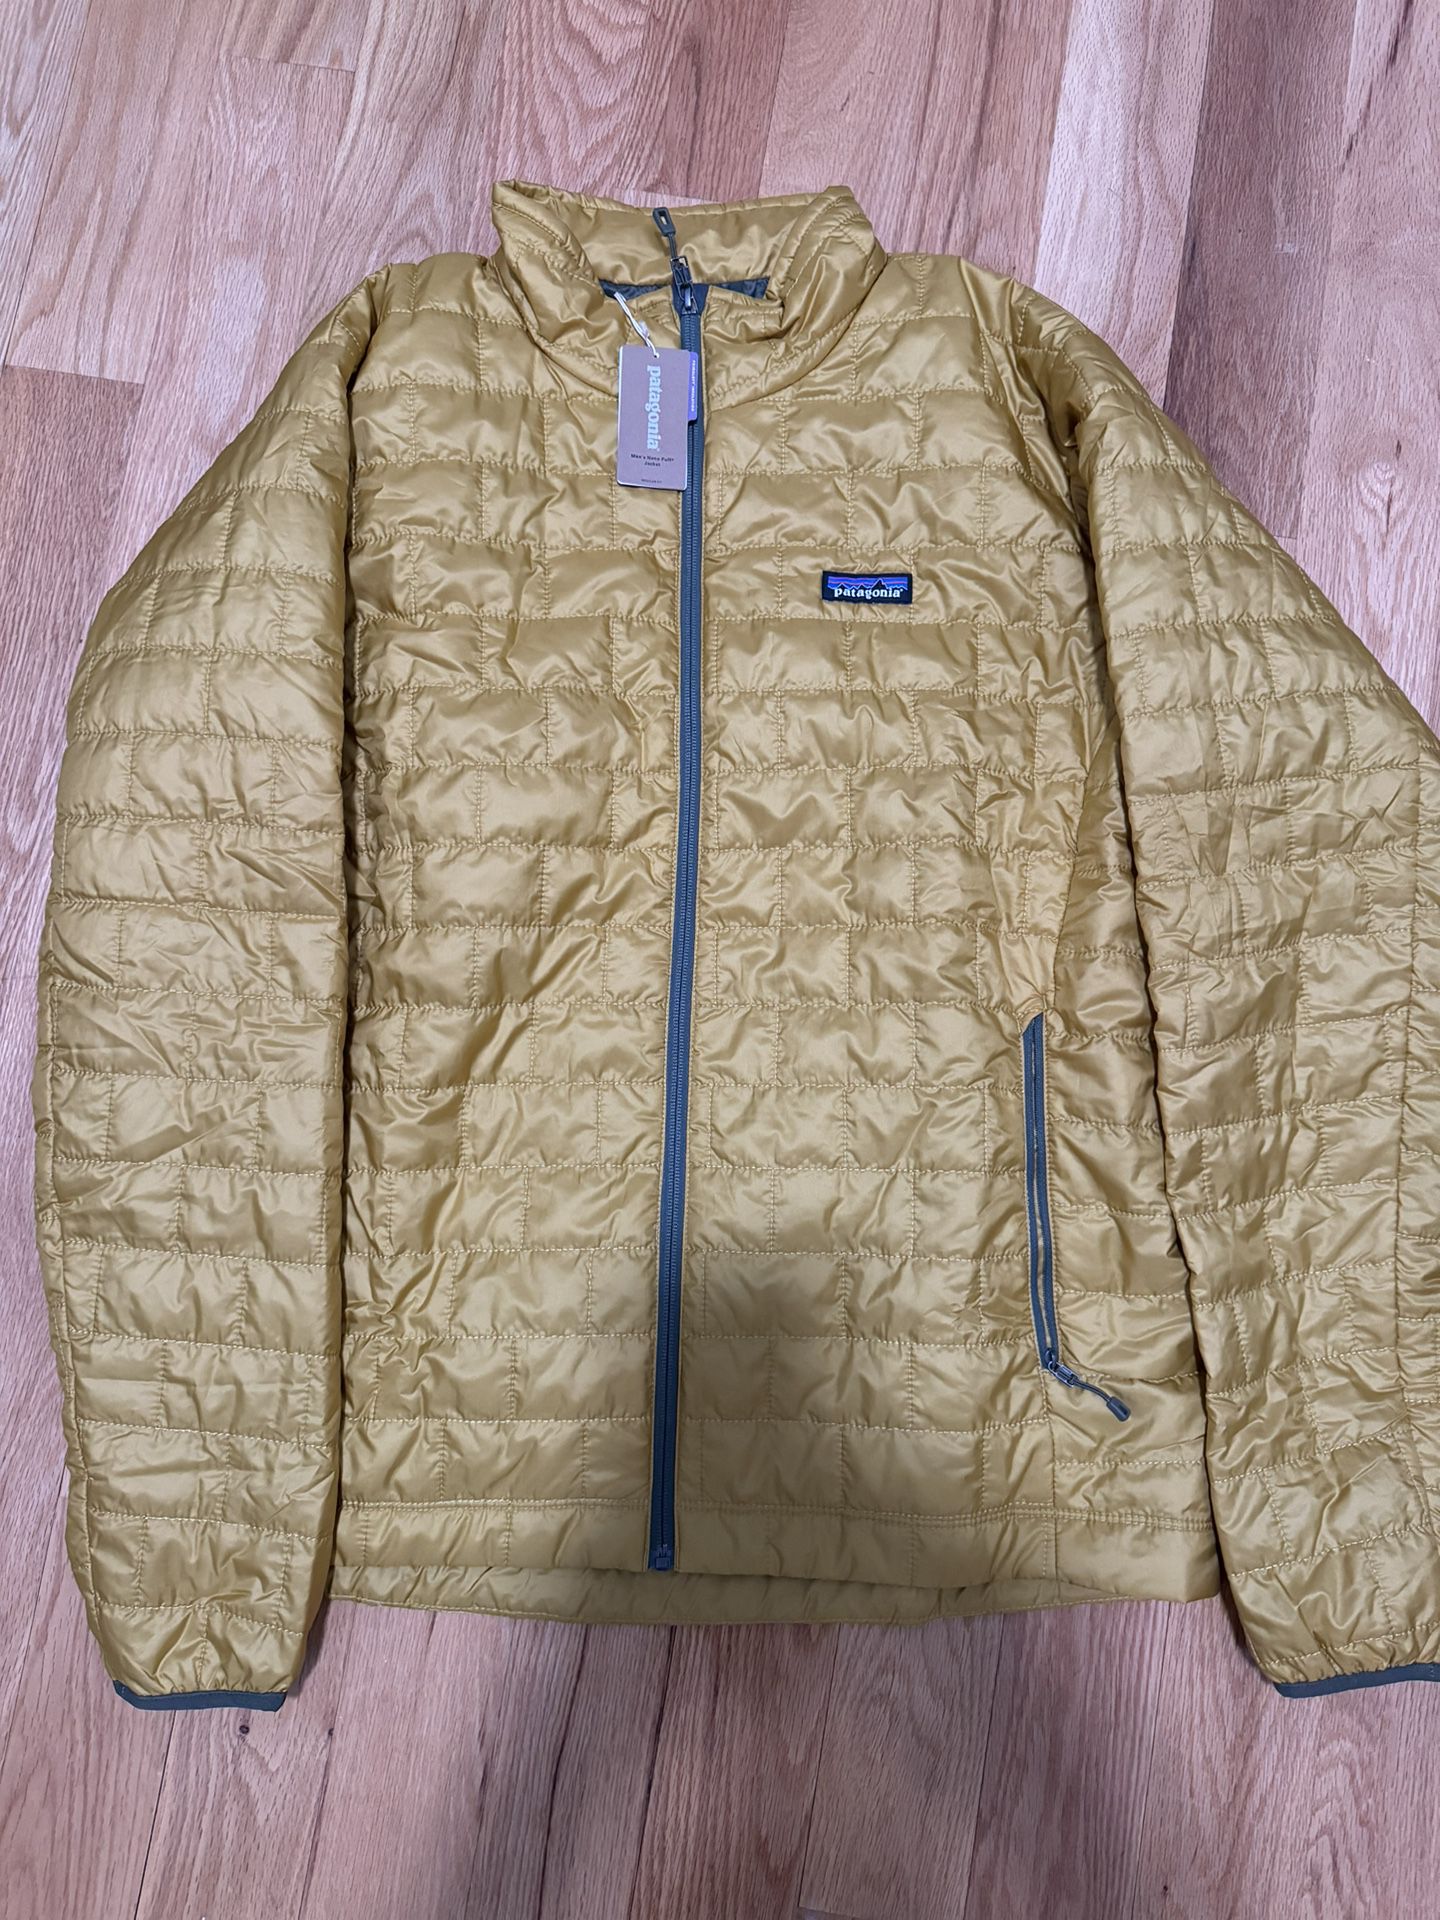 Men’s Patagonia Nano Puff Jacket Brand New With Tags 